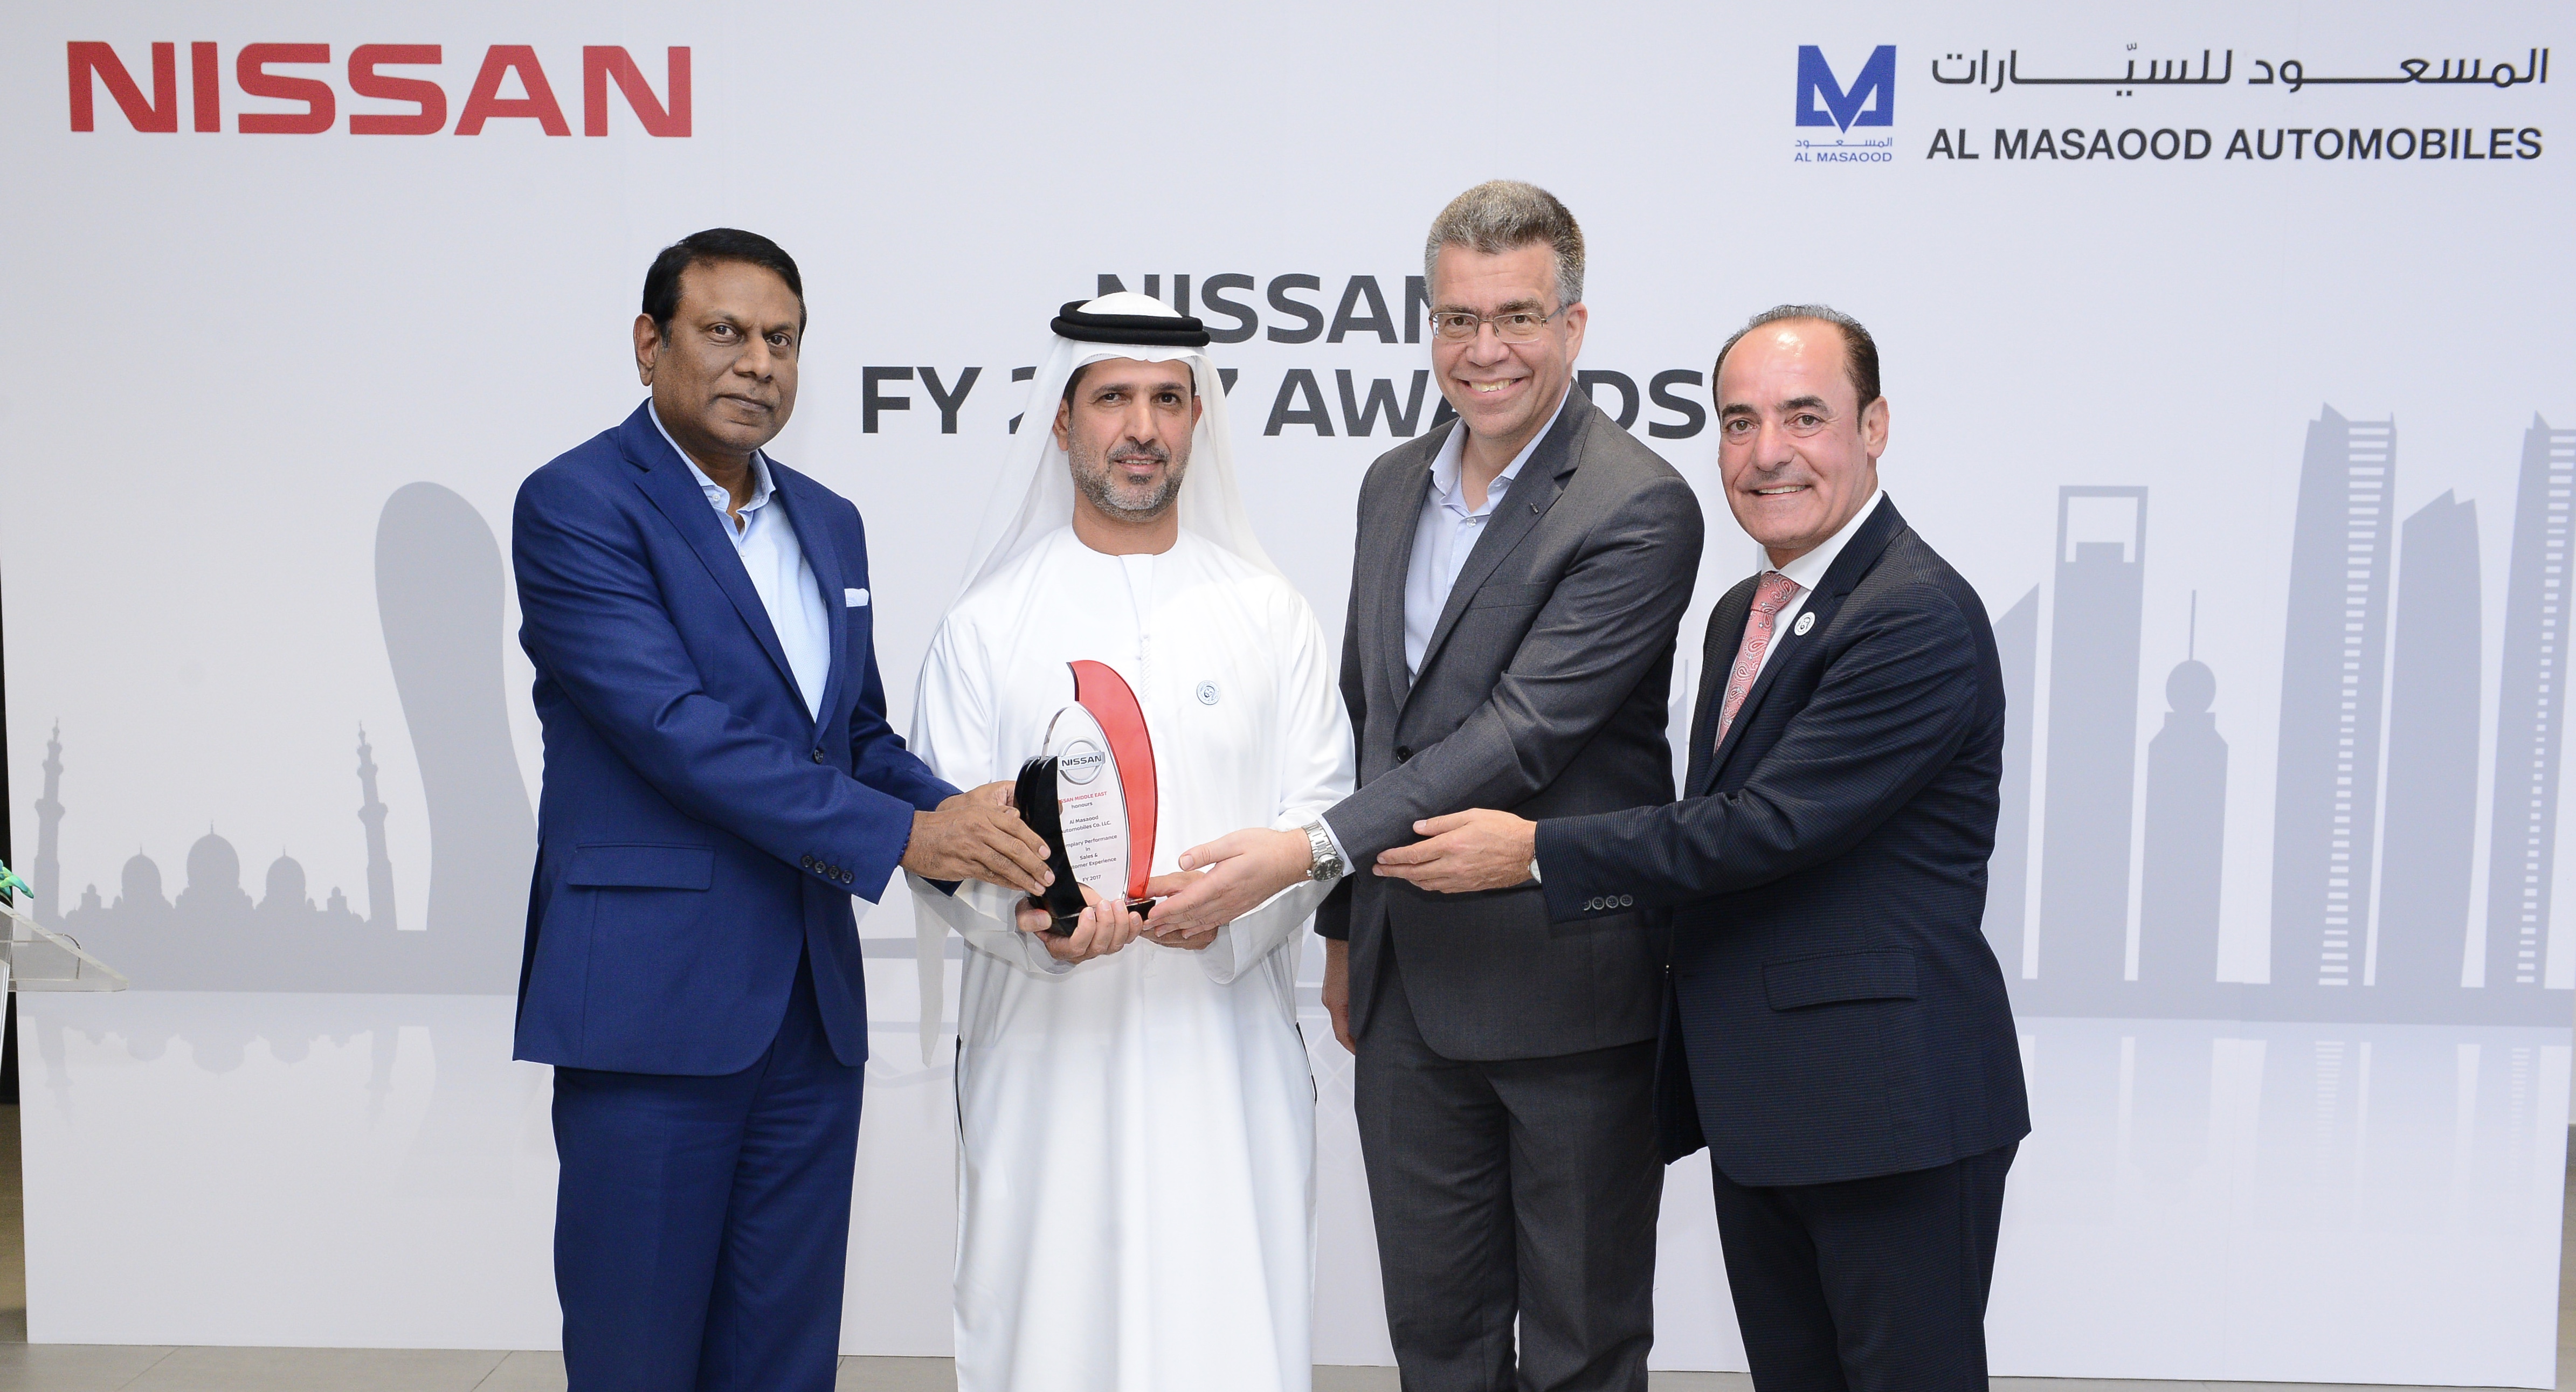 Nissan Awards Al Masaood Automobiles for Outstanding Sales and Customer Service